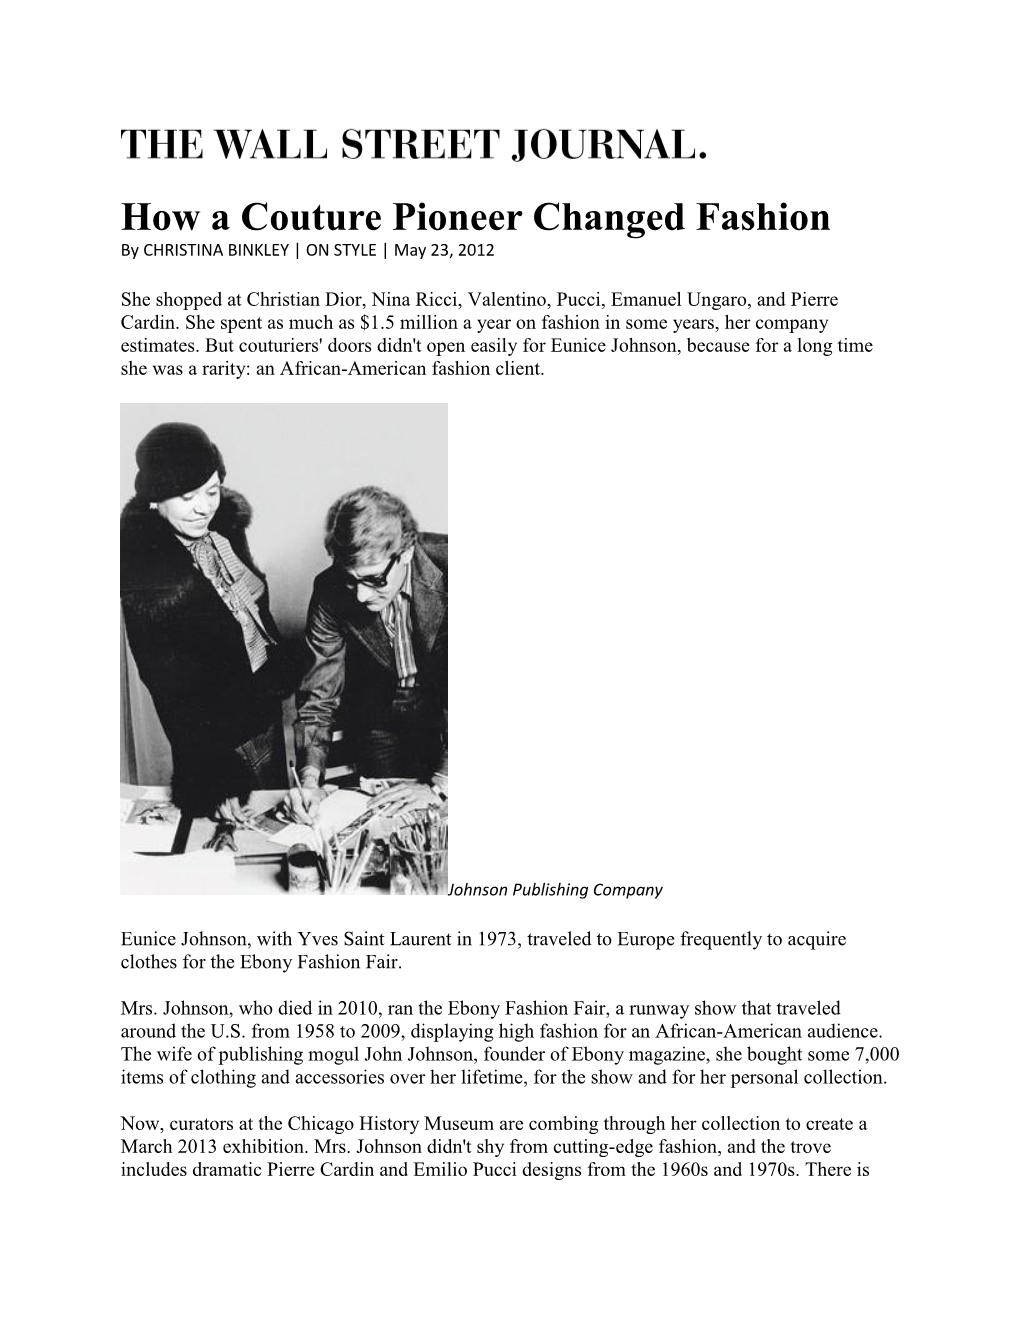 How a Couture Pioneer Changed Fashion by CHRISTINA BINKLEY | on STYLE | May 23, 2012